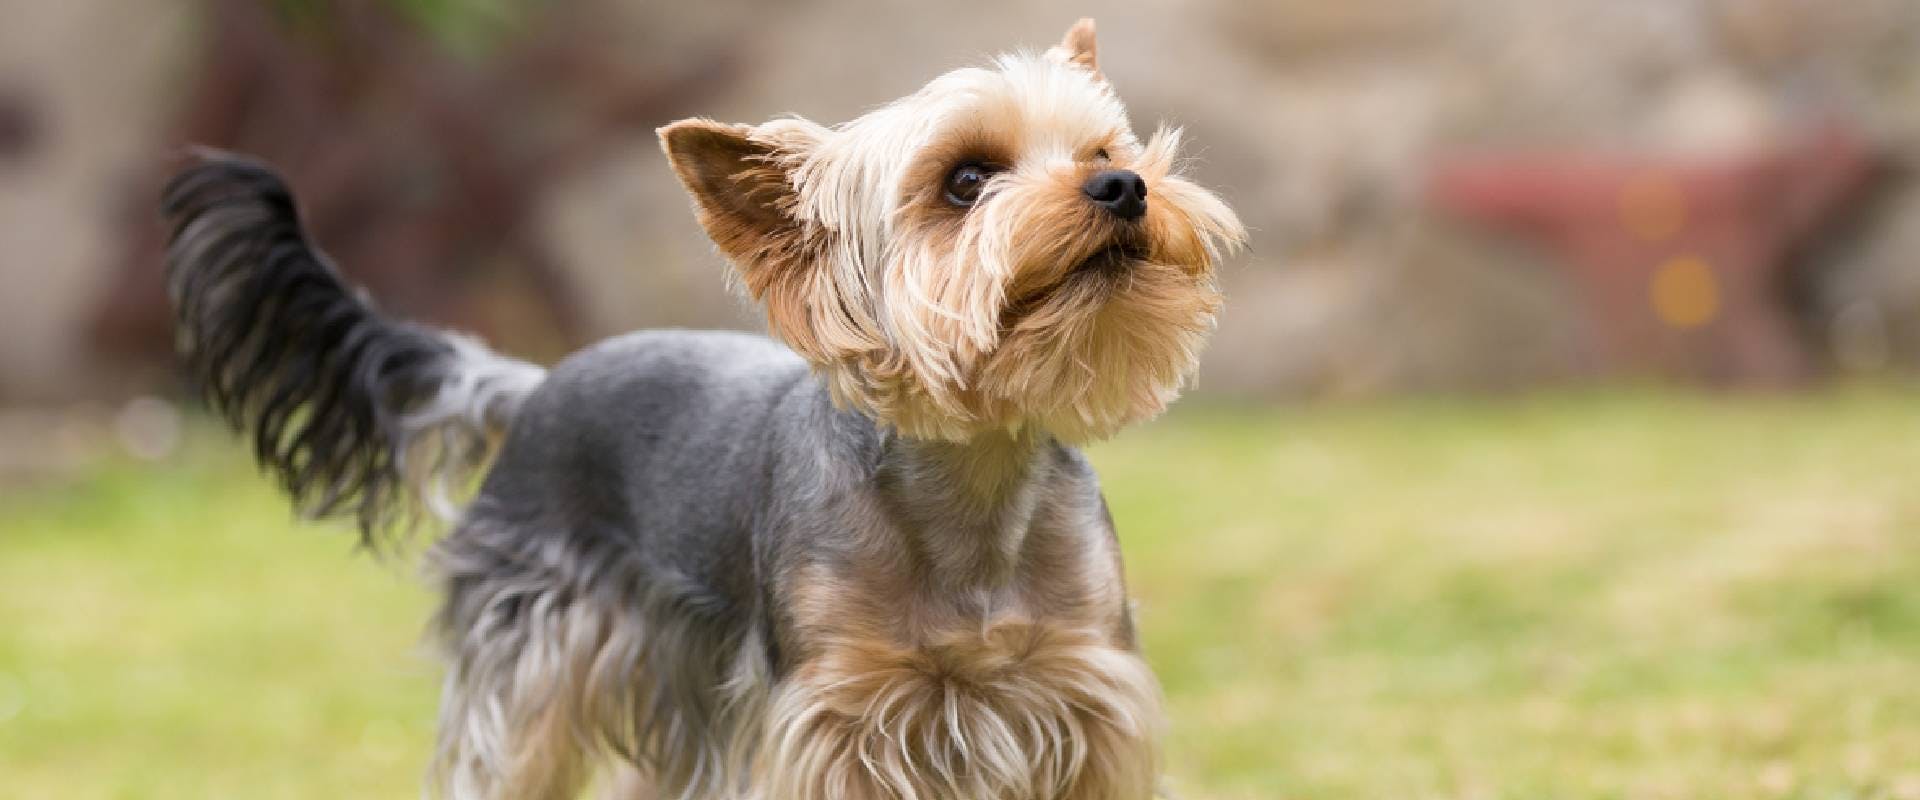 Yorkie with a kennel cut